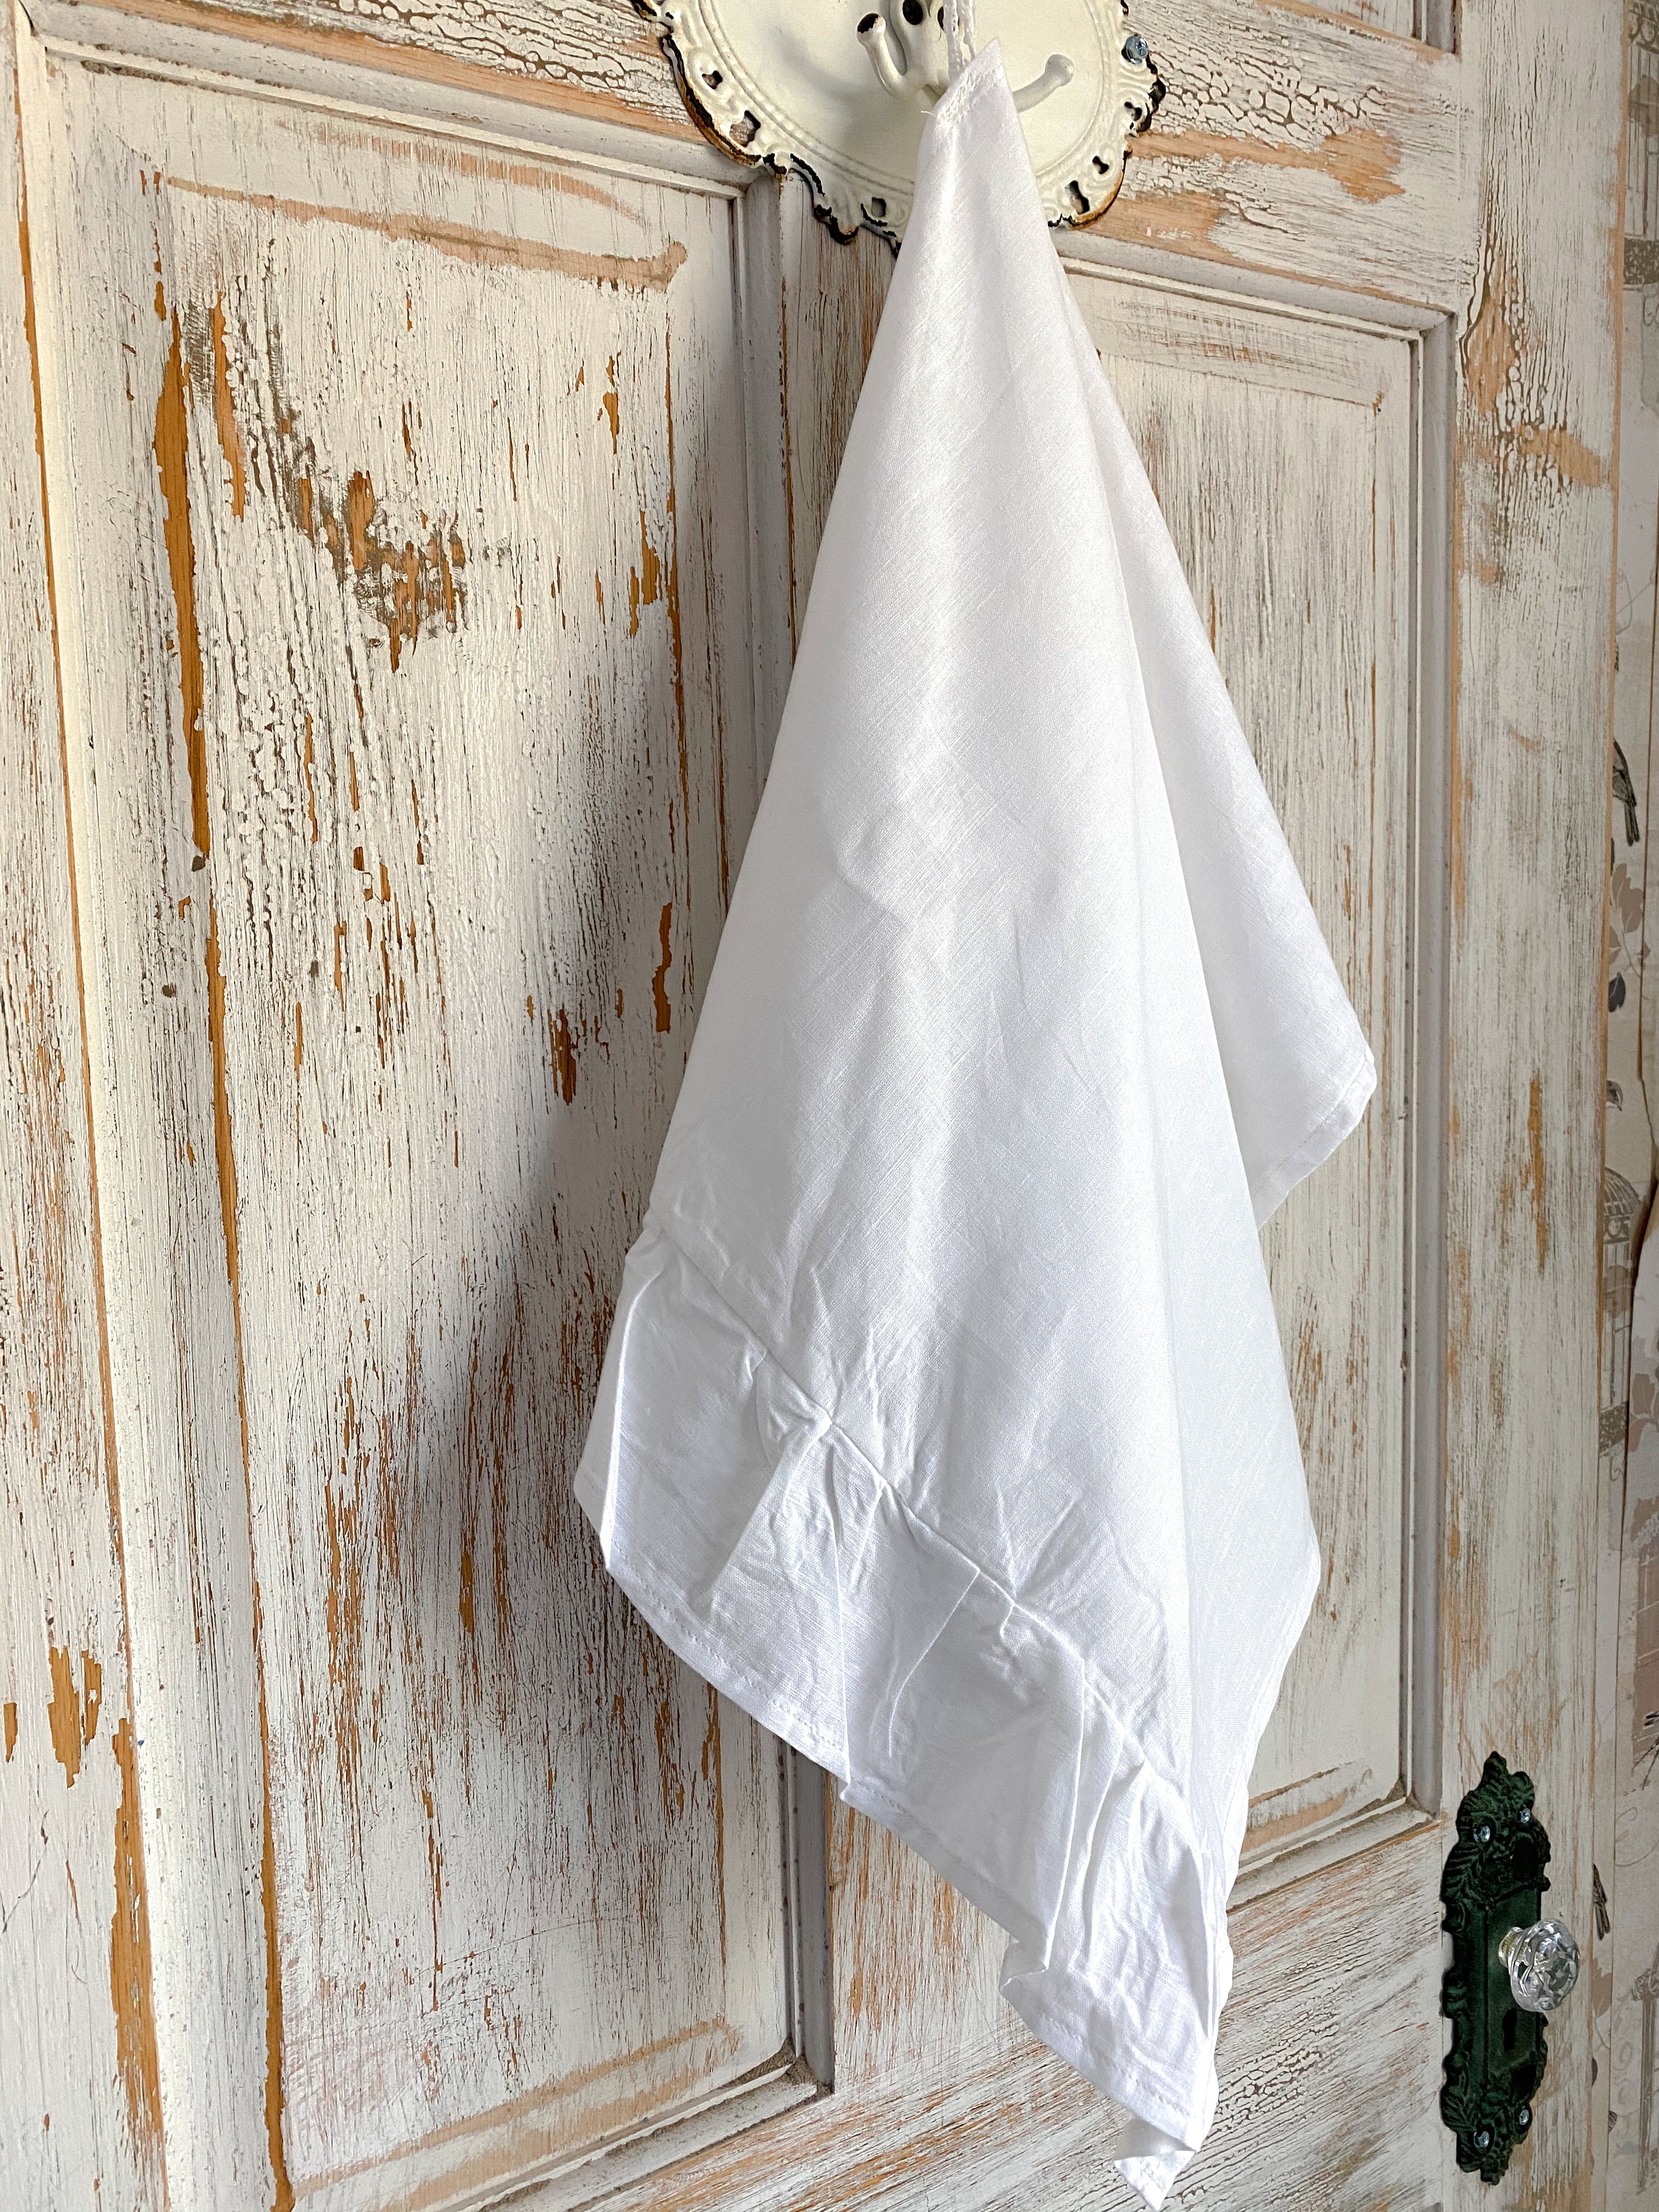 Ruffle Linen Kitchen Towel with Custom Embroidered Text – Linen